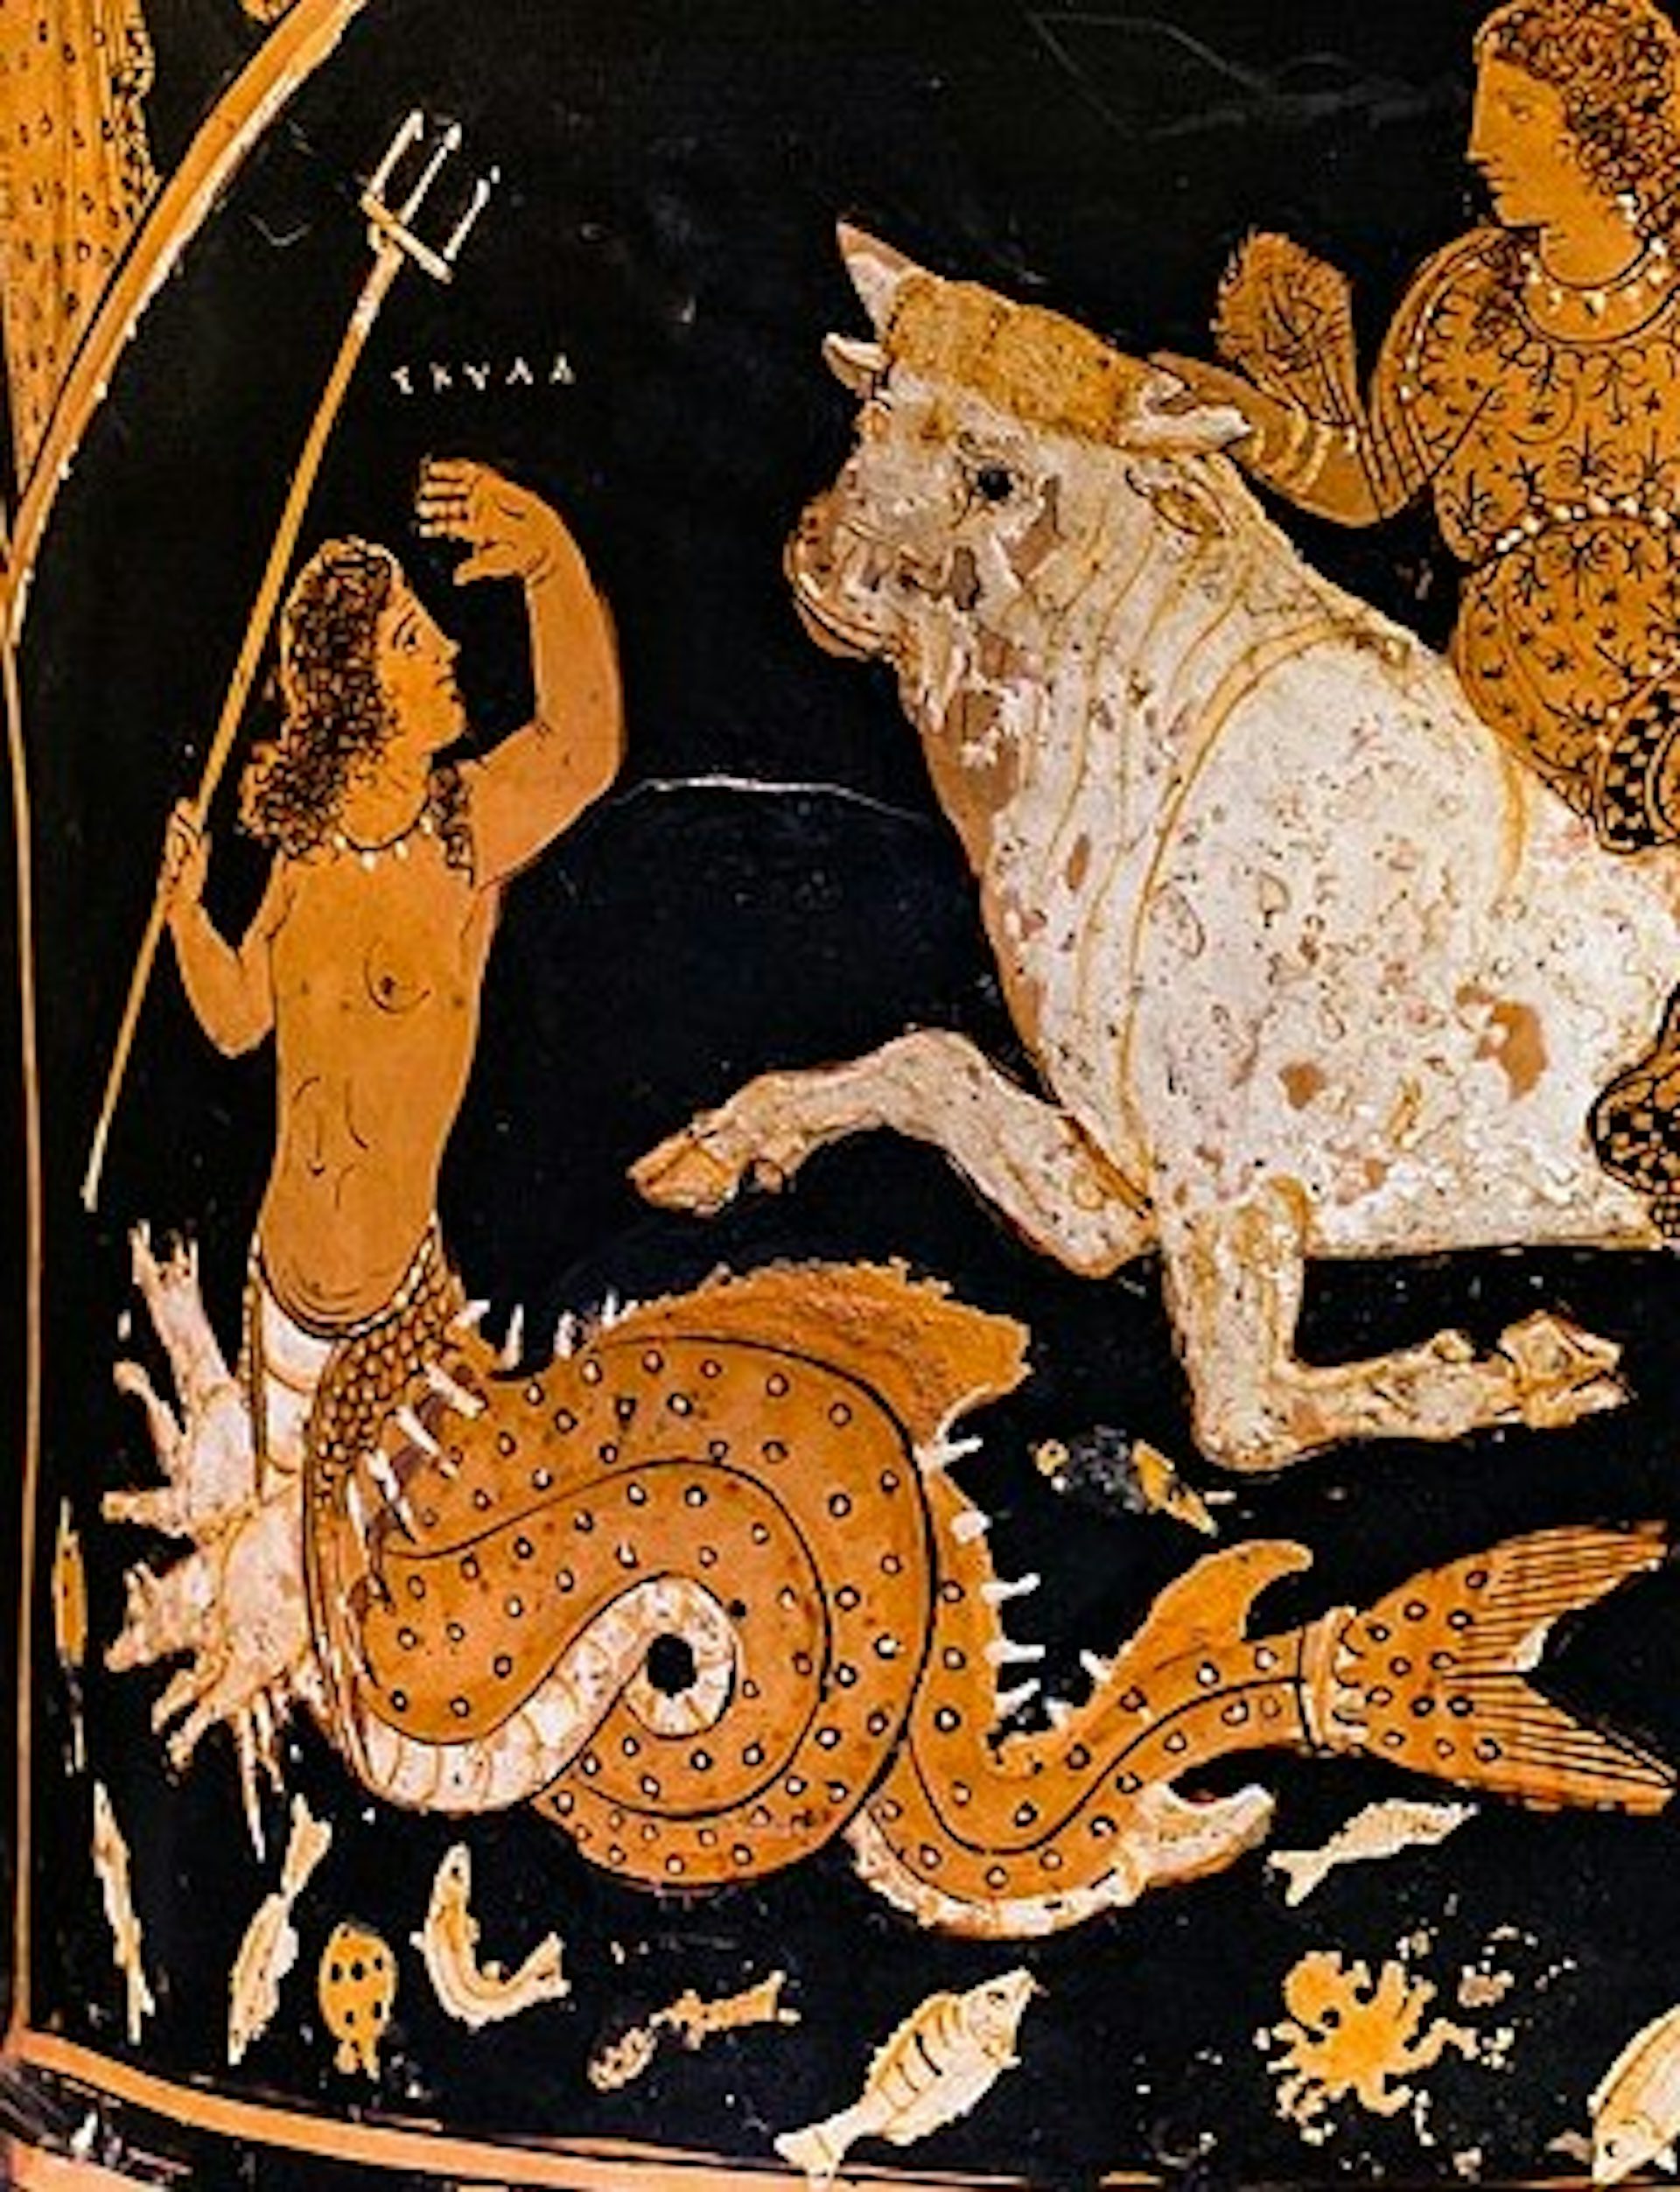 Asteas - Europa on the bull - Dionysos with satyrs and maenads and Pan - Montesarchio 